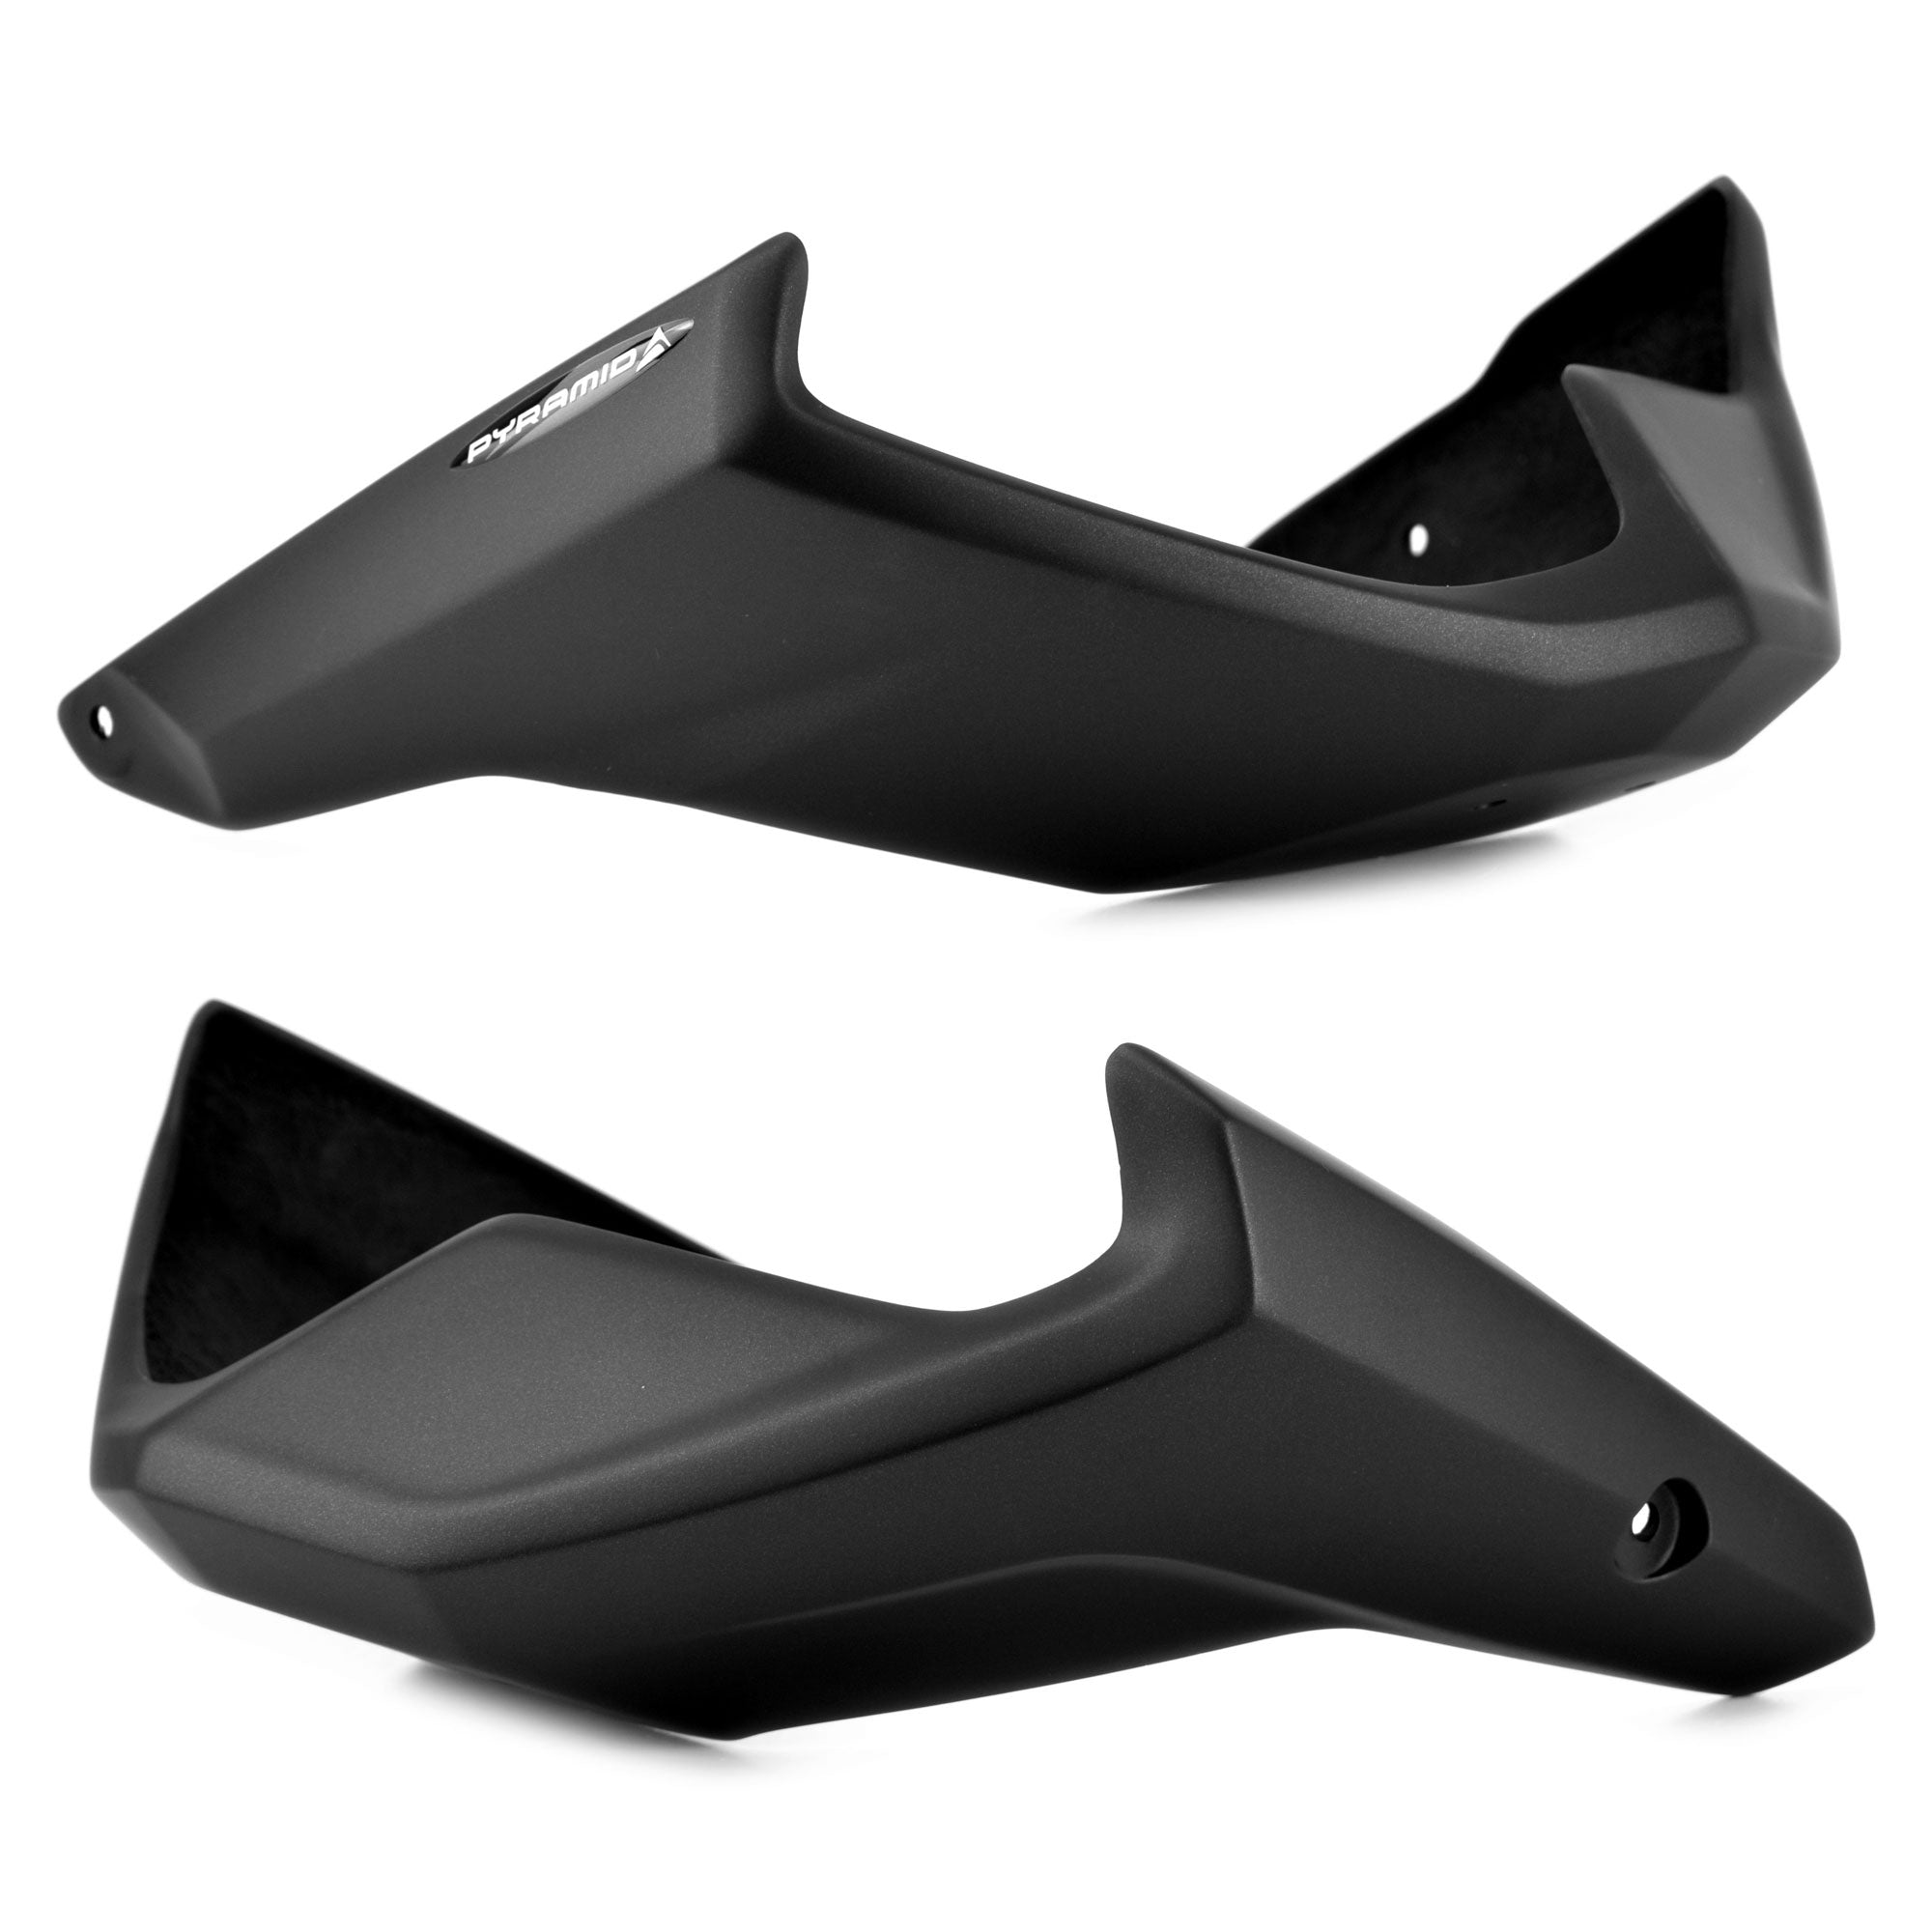 Buy Motorcycle Belly Pans | Pyramid Plastics